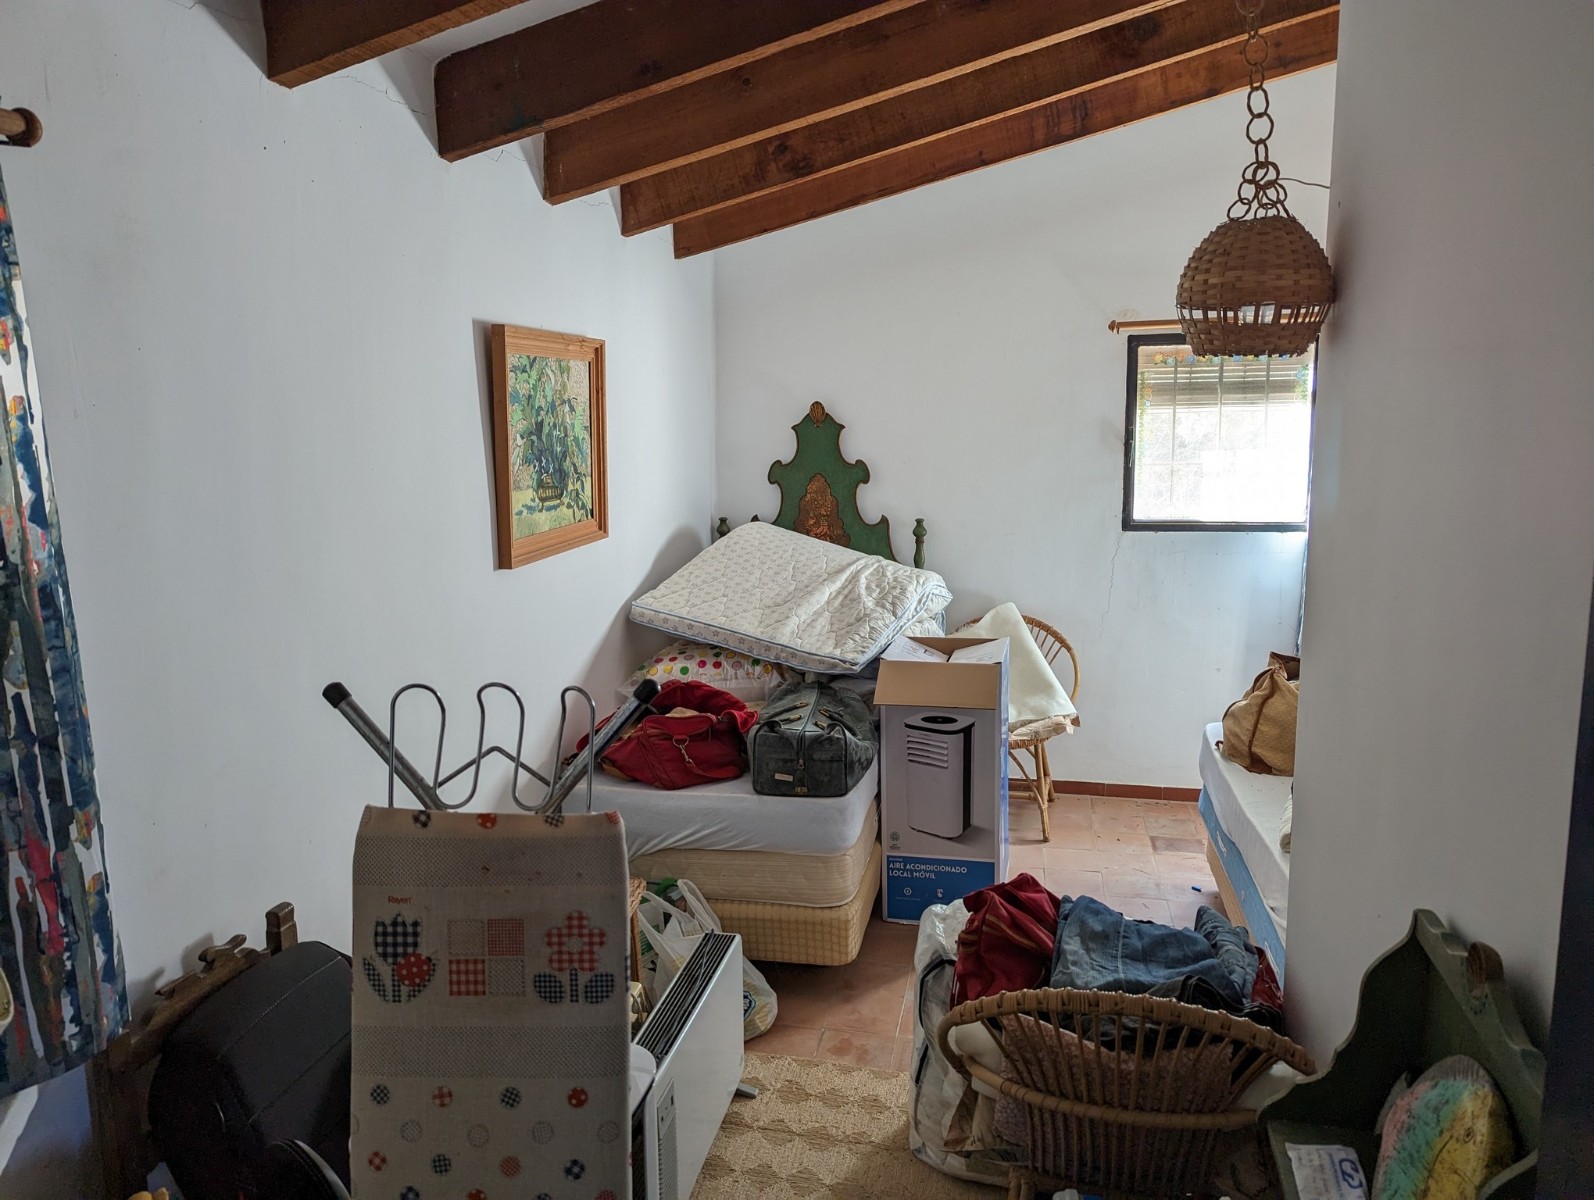 Countryhome for sale in Teulada and Moraira 31